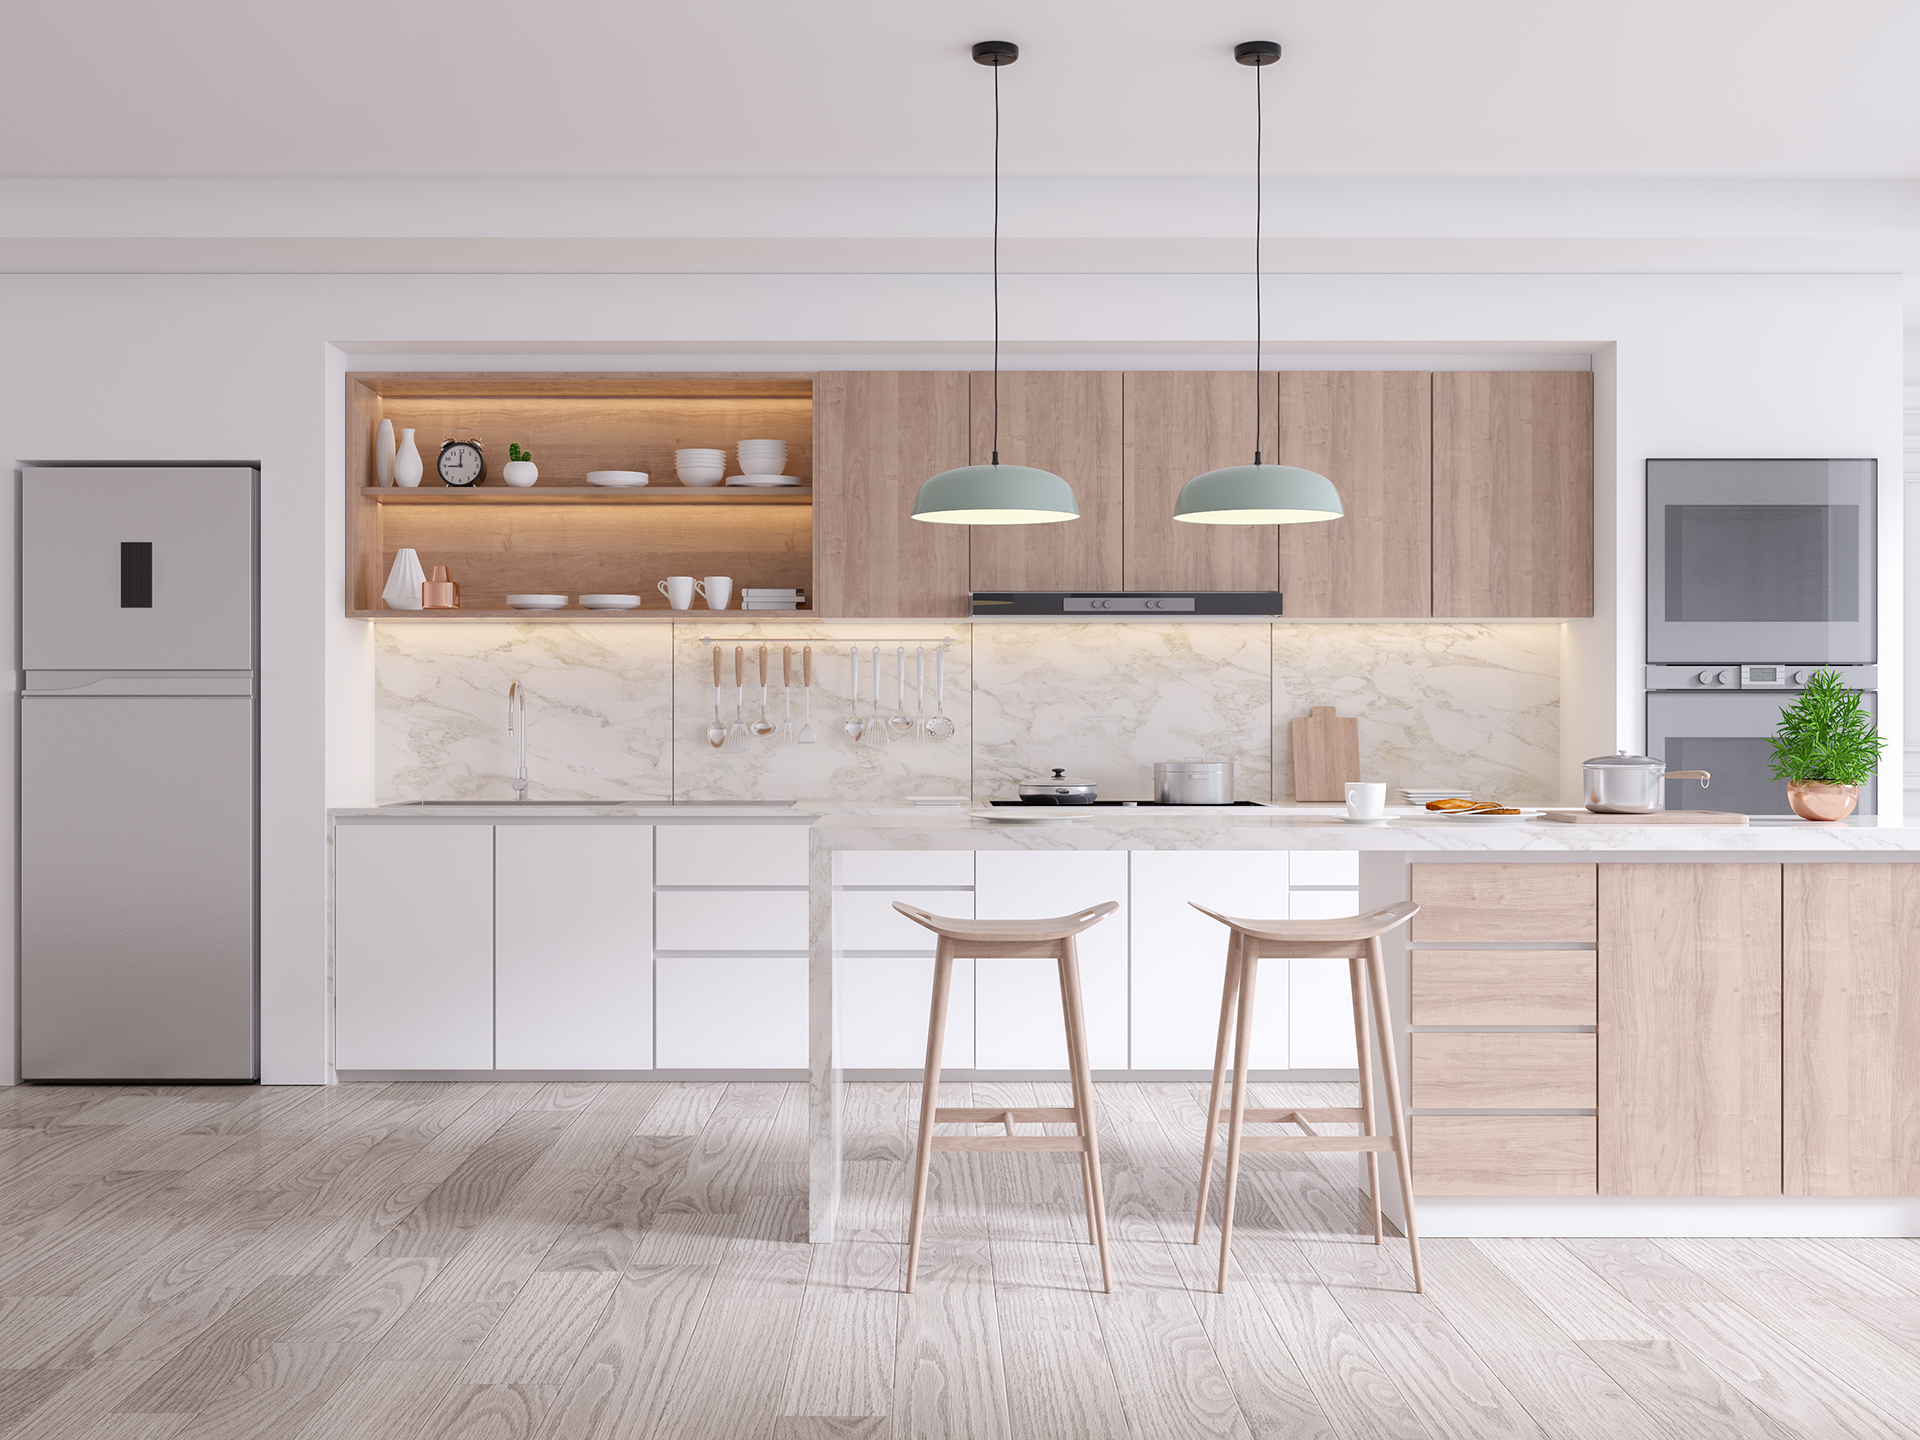 Handle-free kitchen for practical, no-frills functionality